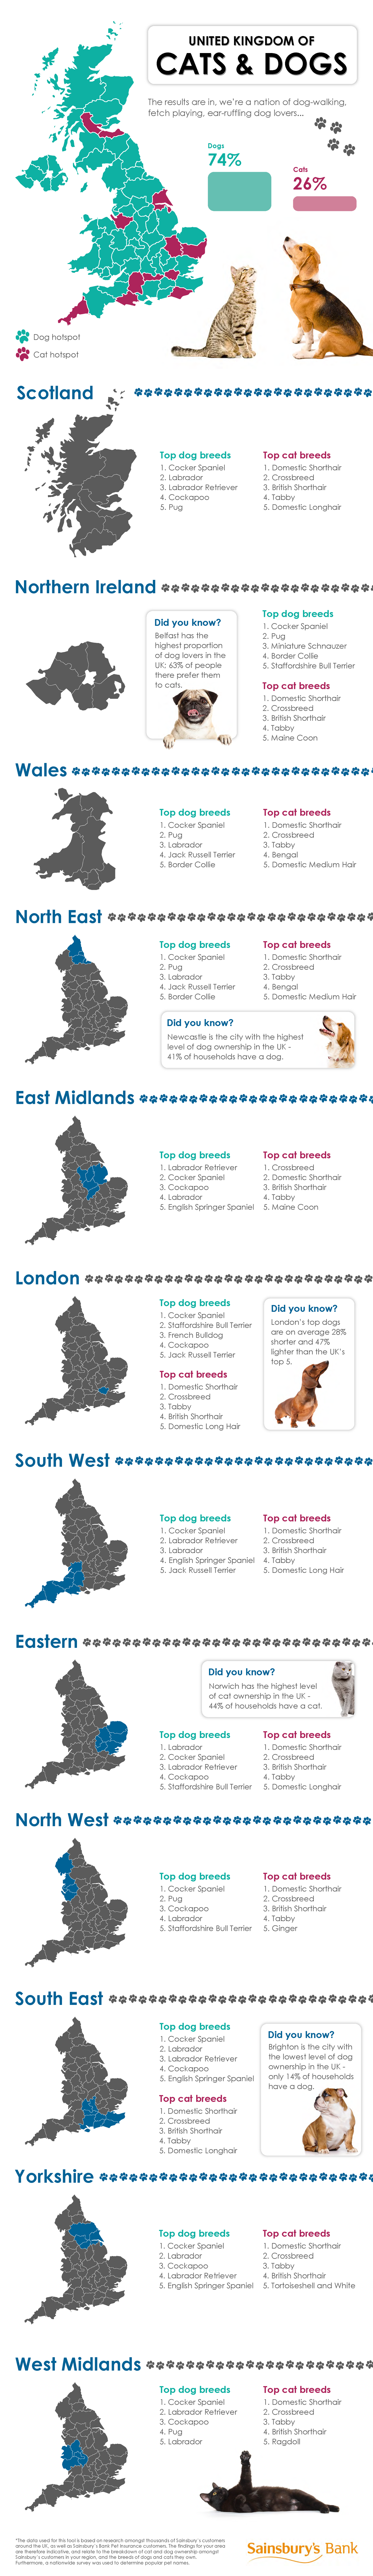 Pet map infographic